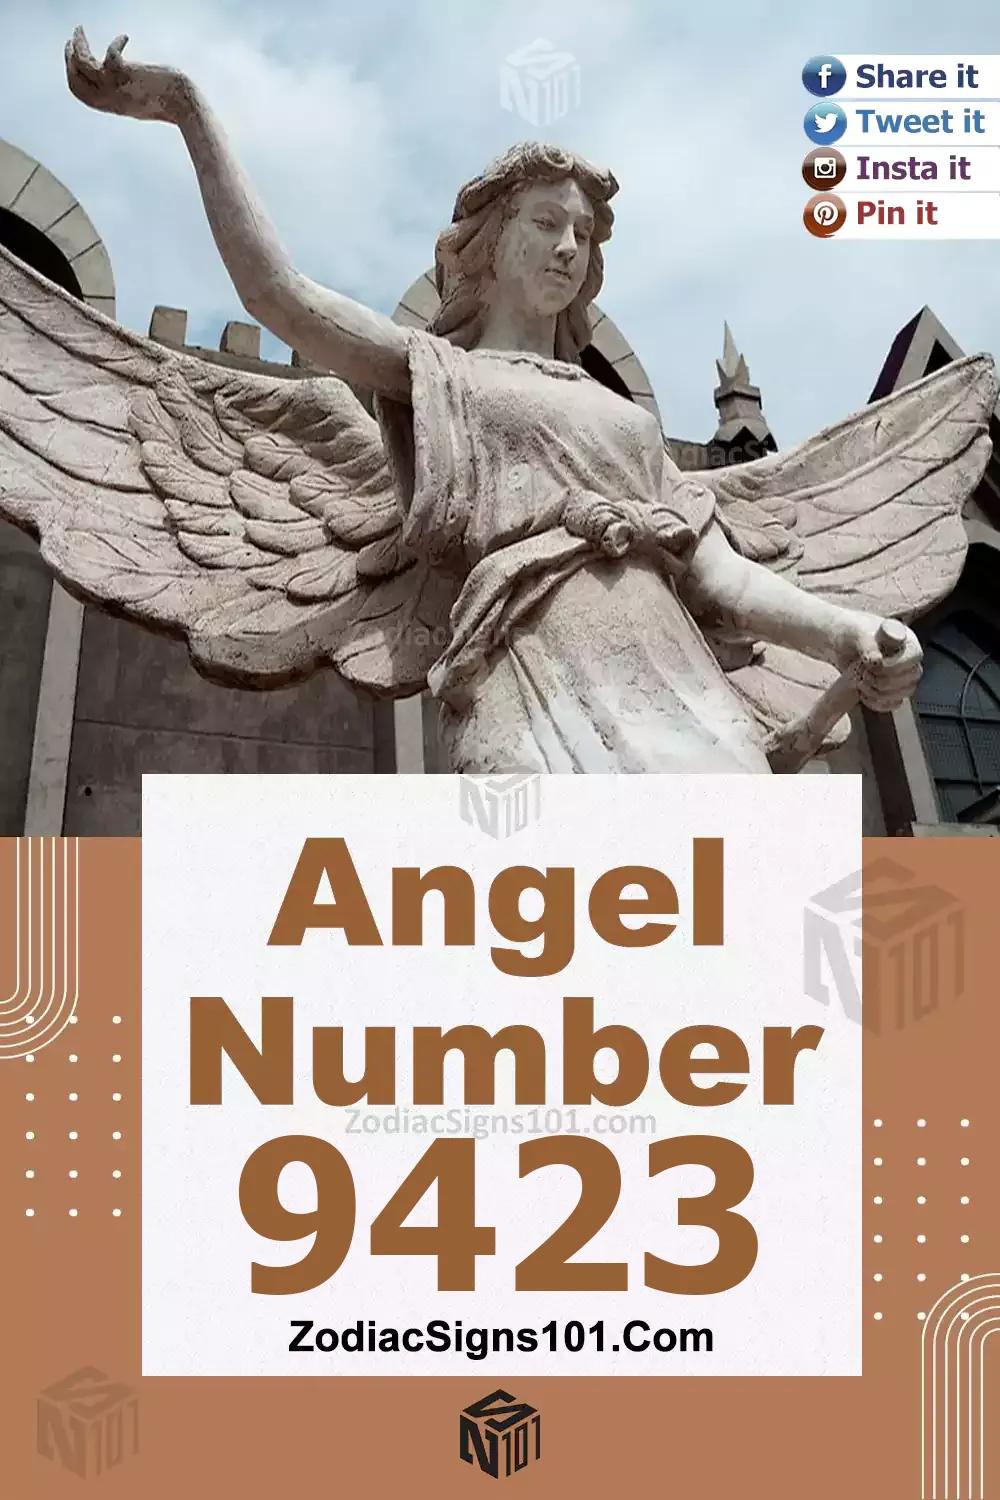 9423 Angel Number Meaning